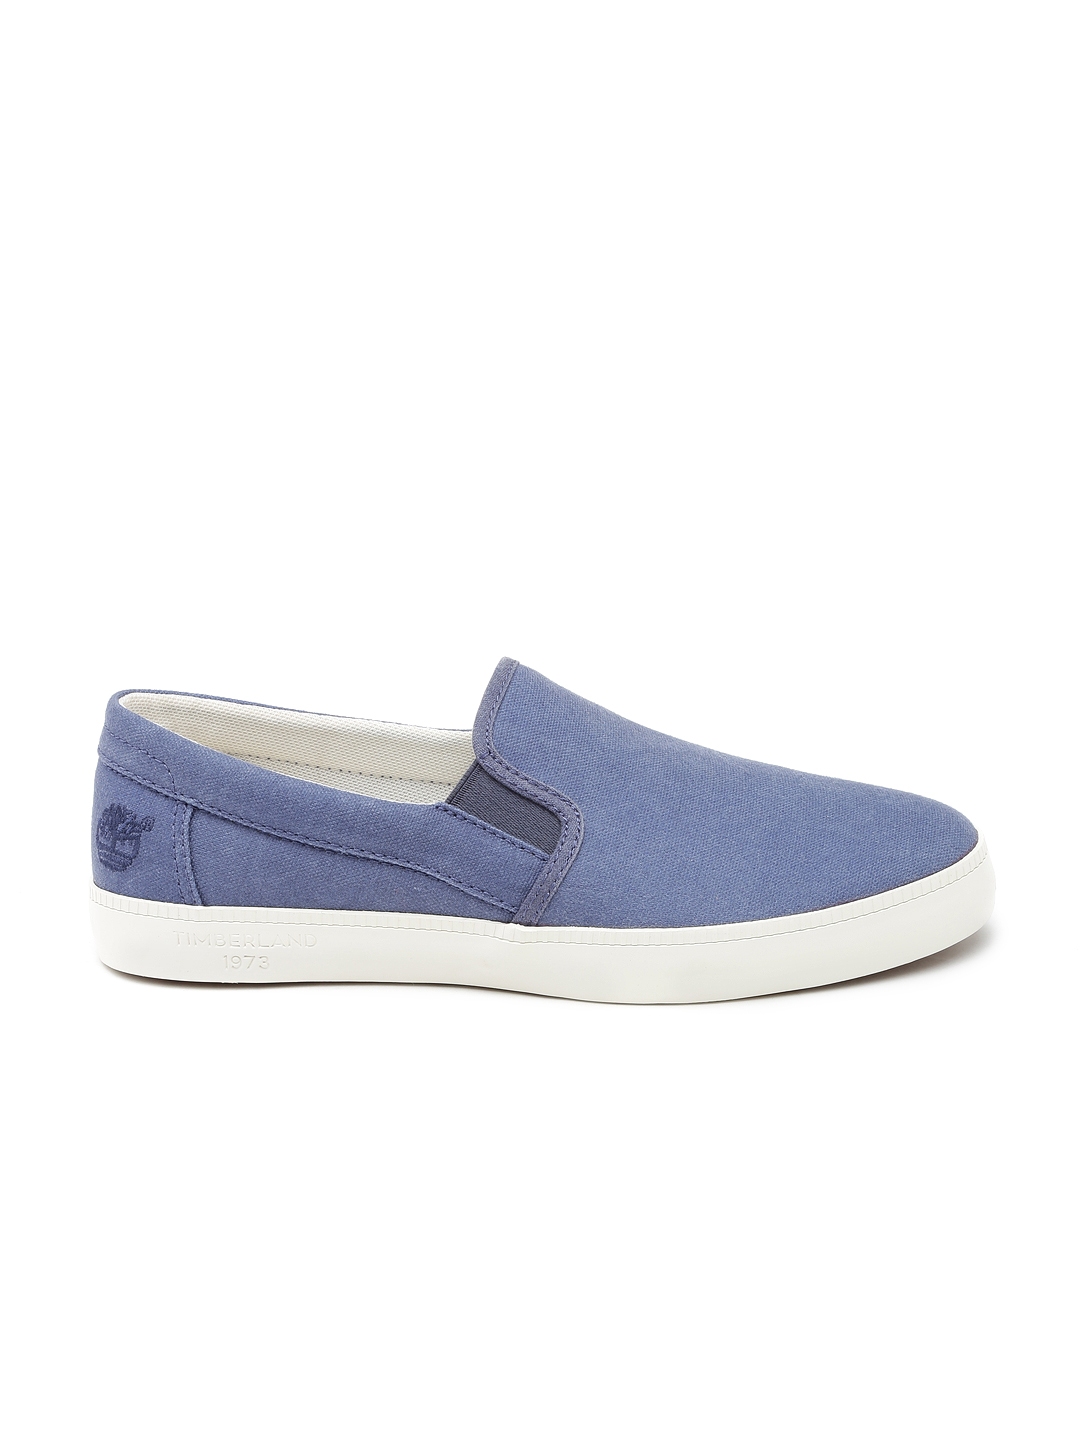 Buy Timberland Men Blue Slip Ons - Casual Shoes for Men 1425655 | Myntra